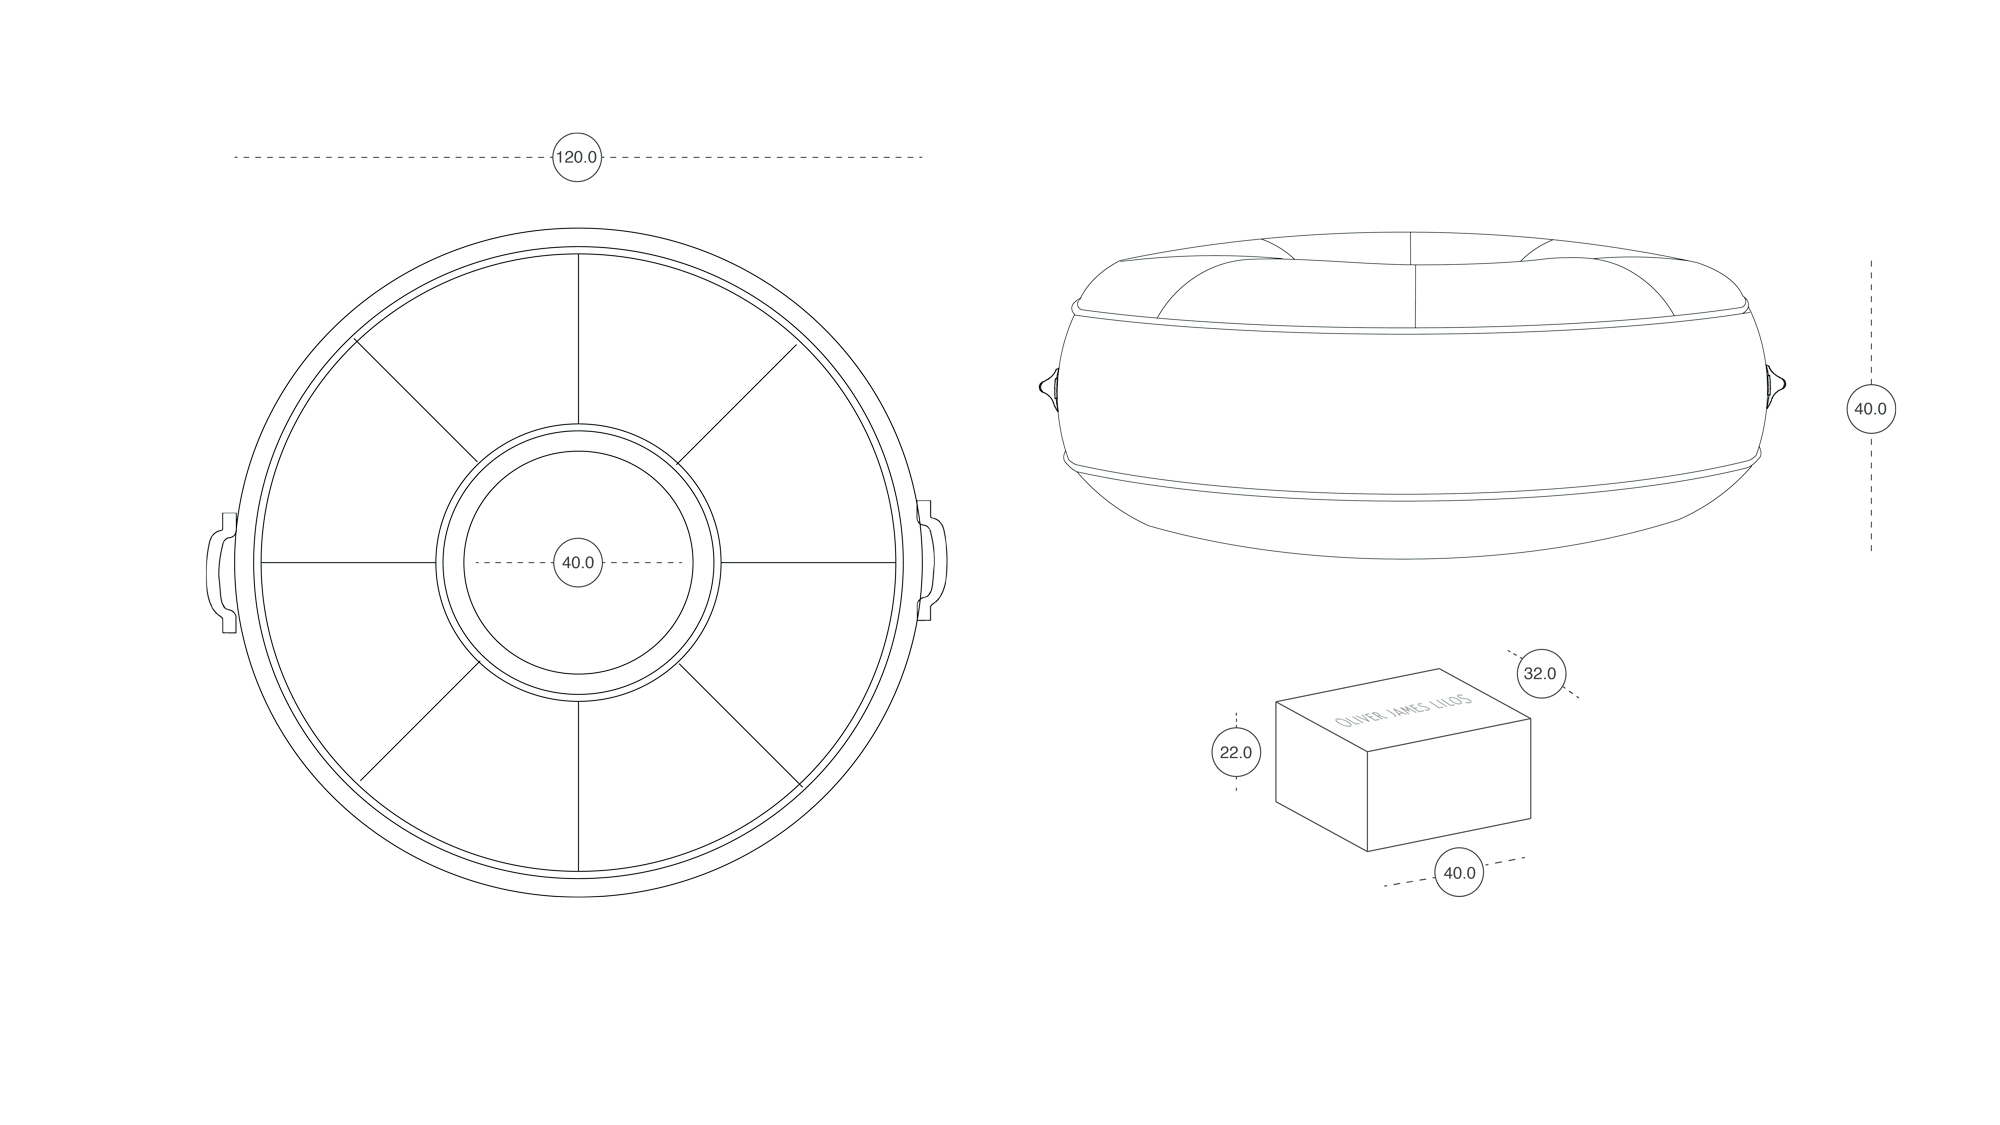 An orthographic drawing in centimeters of a pool float for adults.